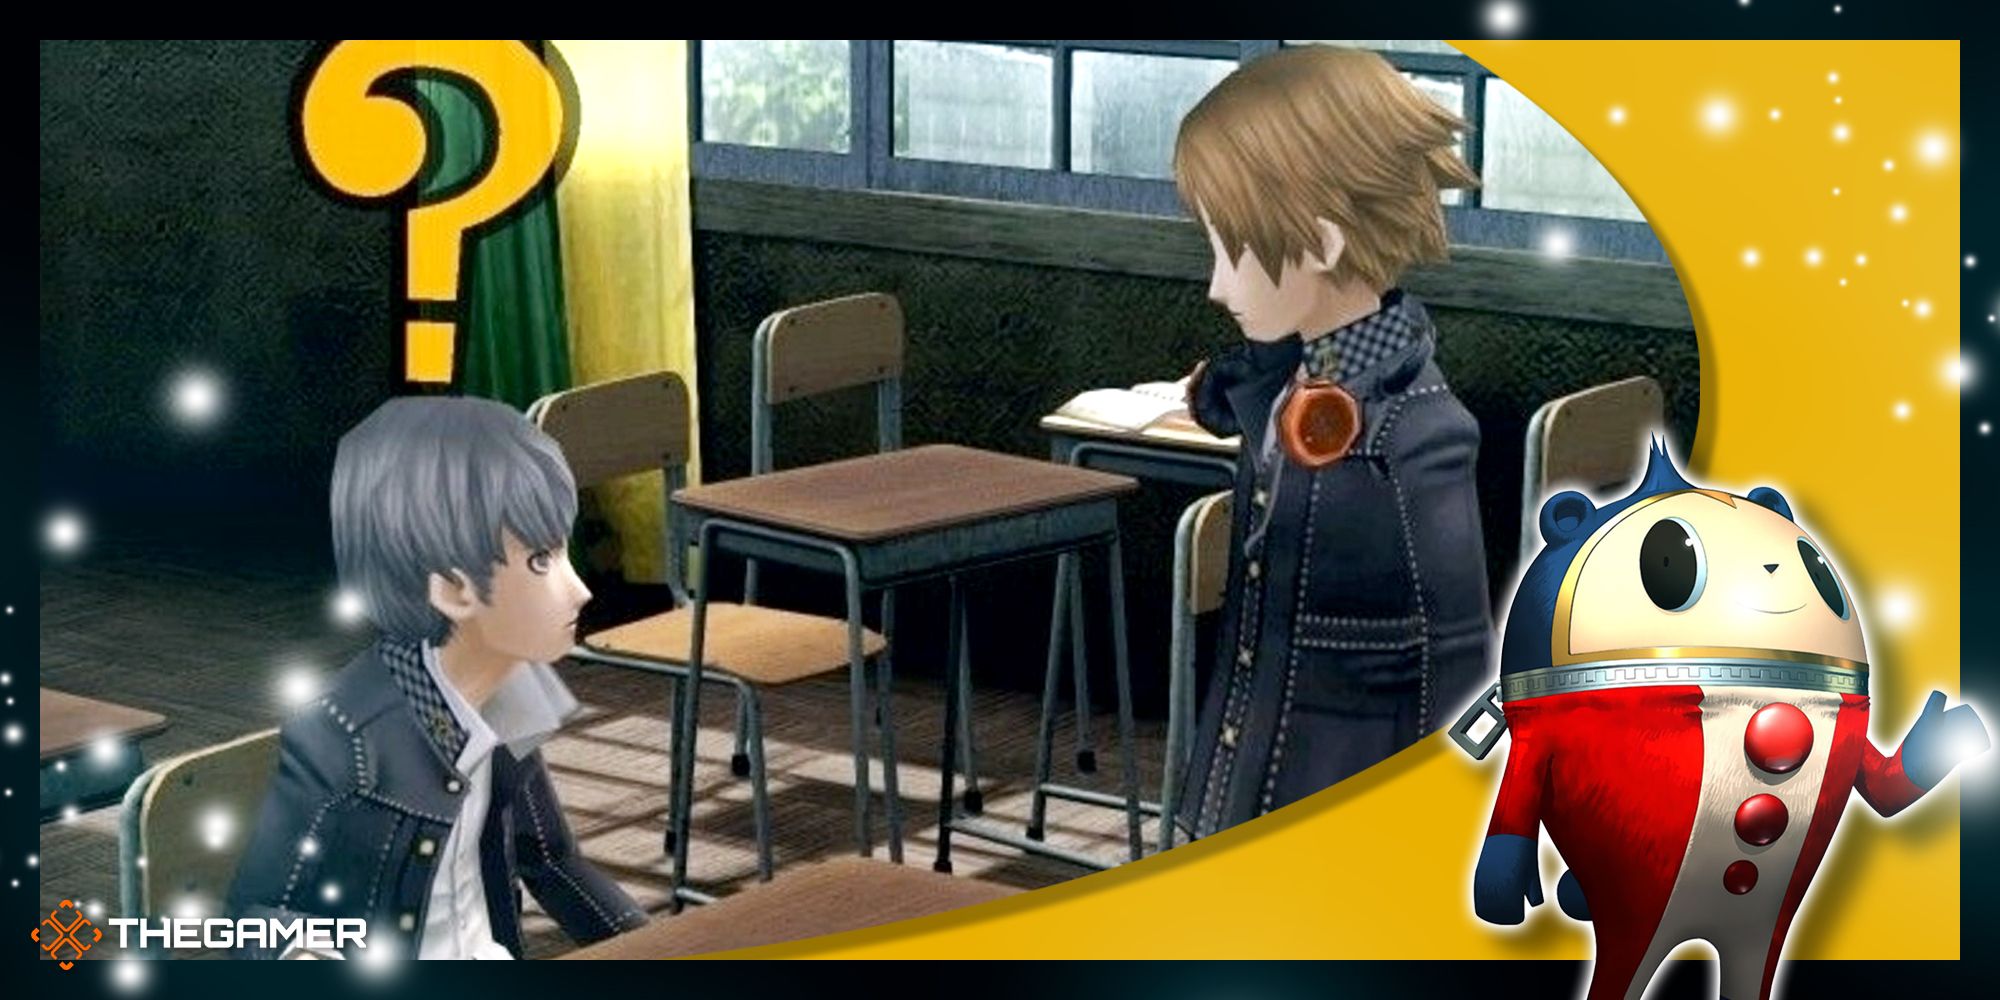 Persona 4 Golden - Yu and Yosuke talking in class with a Teddie overlay in the corner.